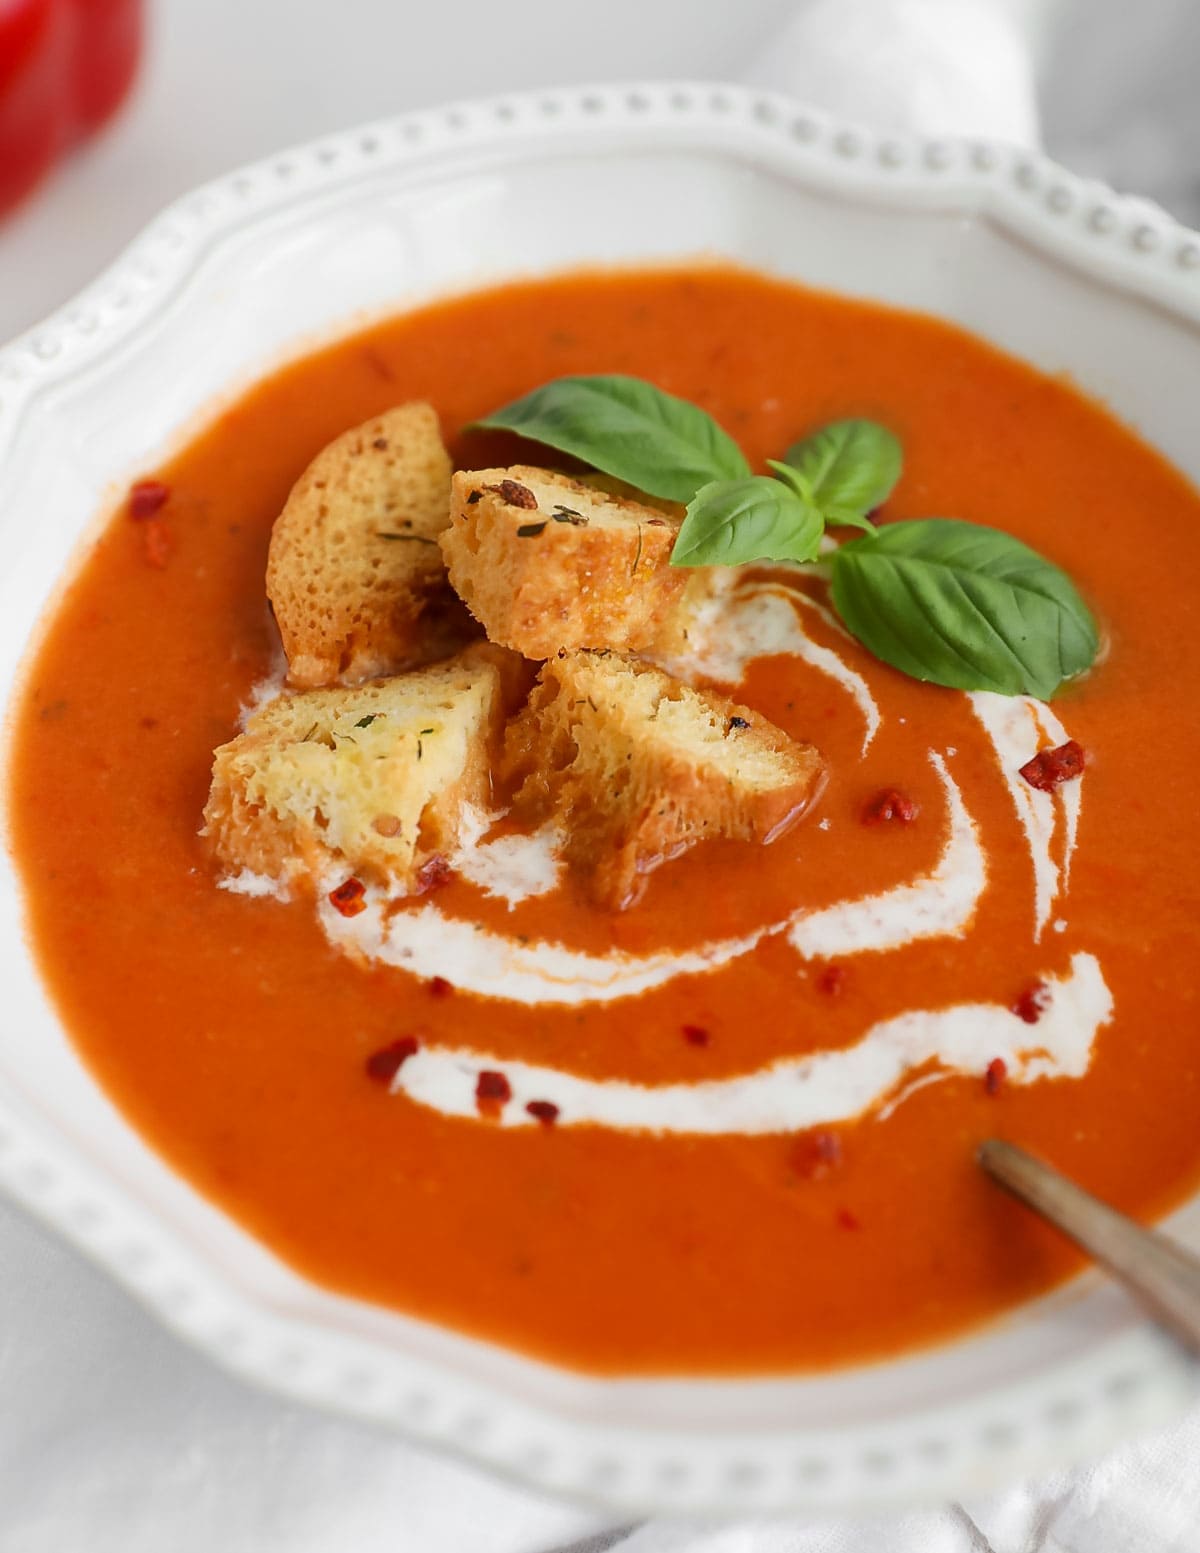 A close up image of creamy red soup in a white bowl. On top of the soup there are four croutons, basil leaves, white coconut milk, and crushed red pepper flakes.